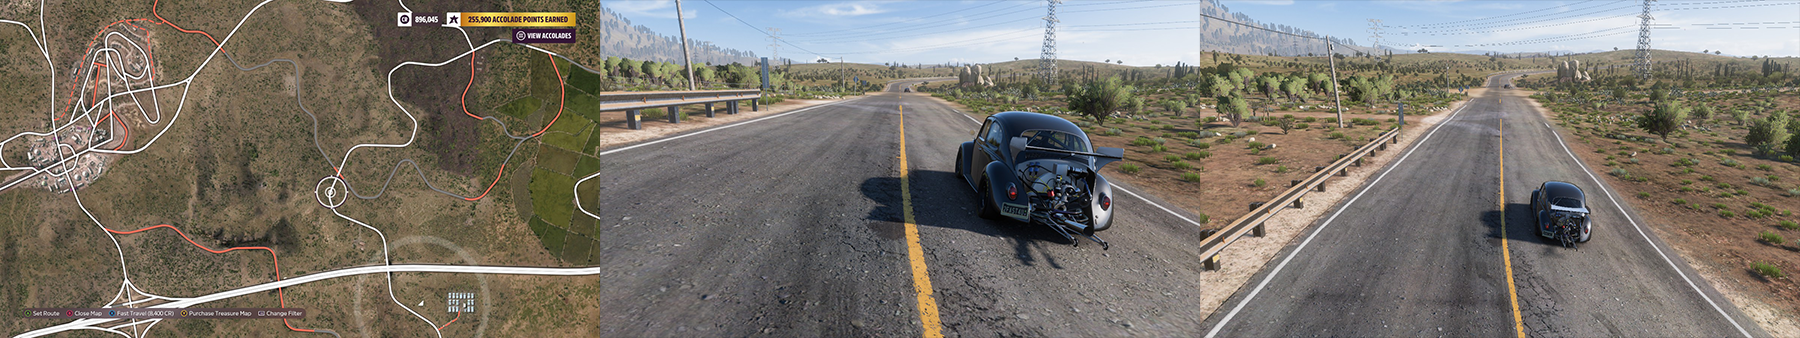 A comprehensive guide for the immersive Drag Racer image 42